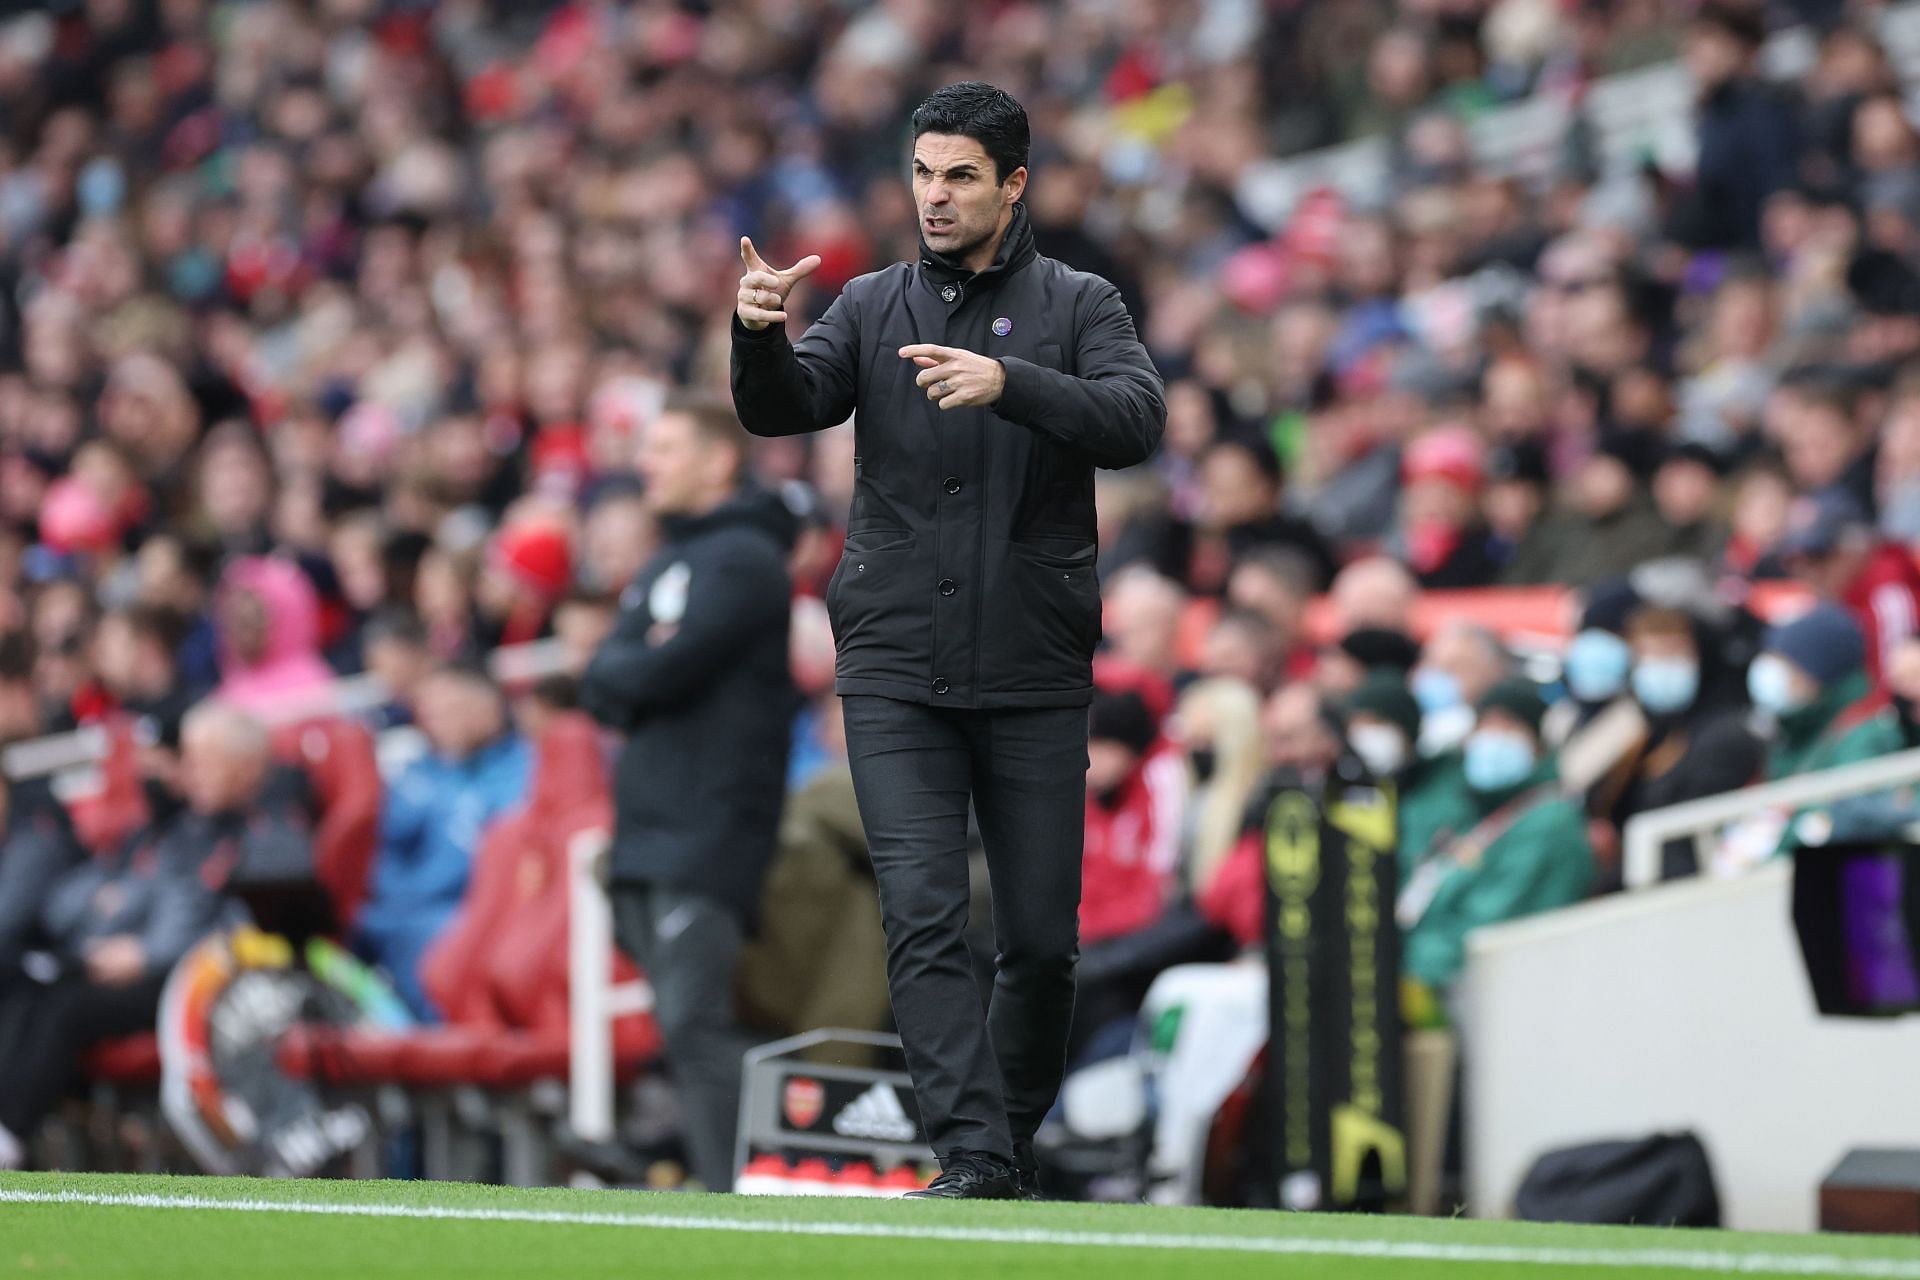 Arsenal manager Mikel Arteta suffered a defeat against Manchester United.